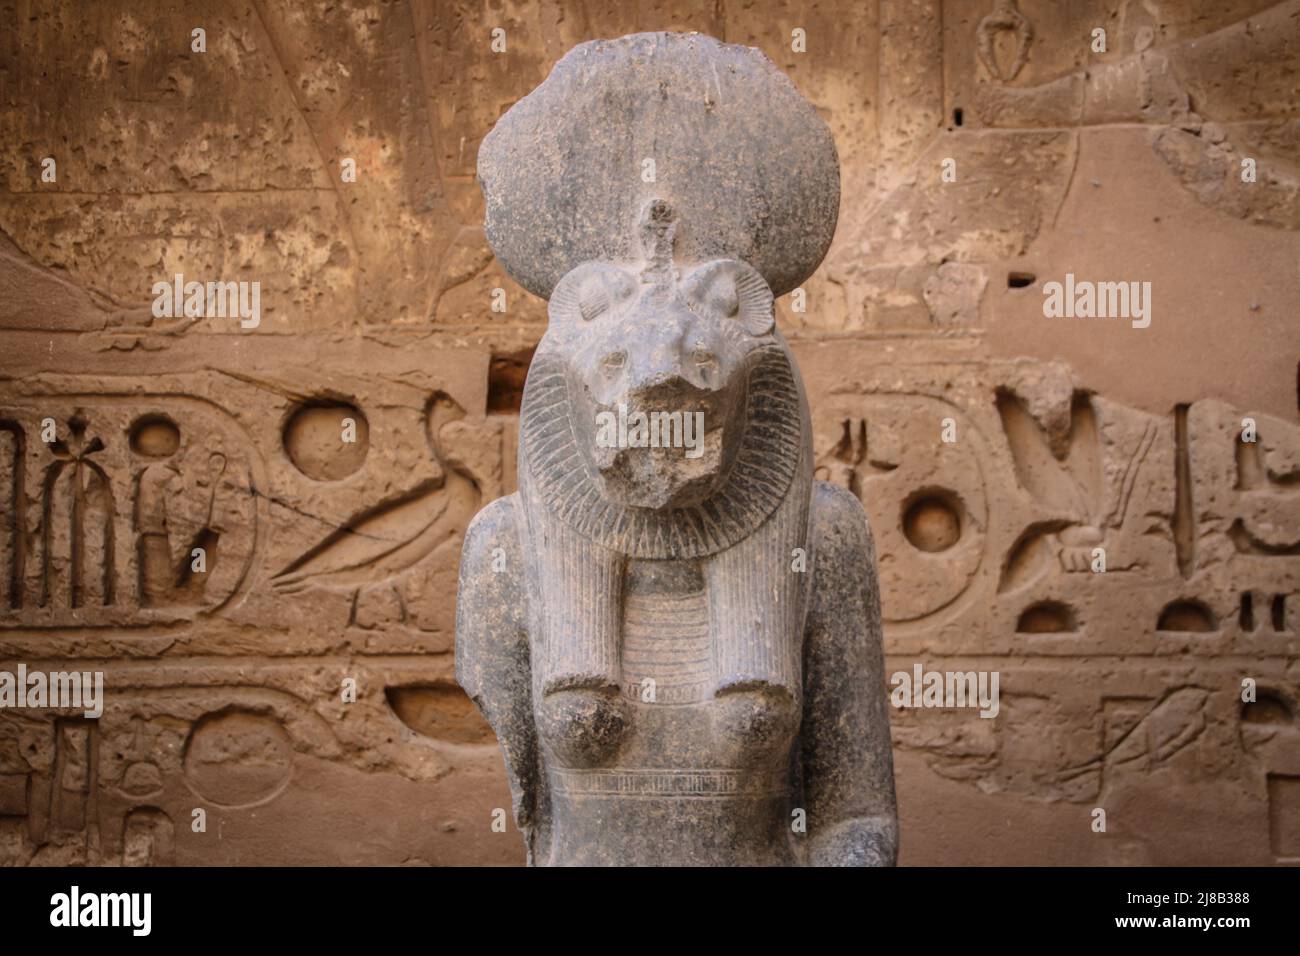 Statue of Sekhmet, Egyptian goddess with a lioness head. Stock Photo